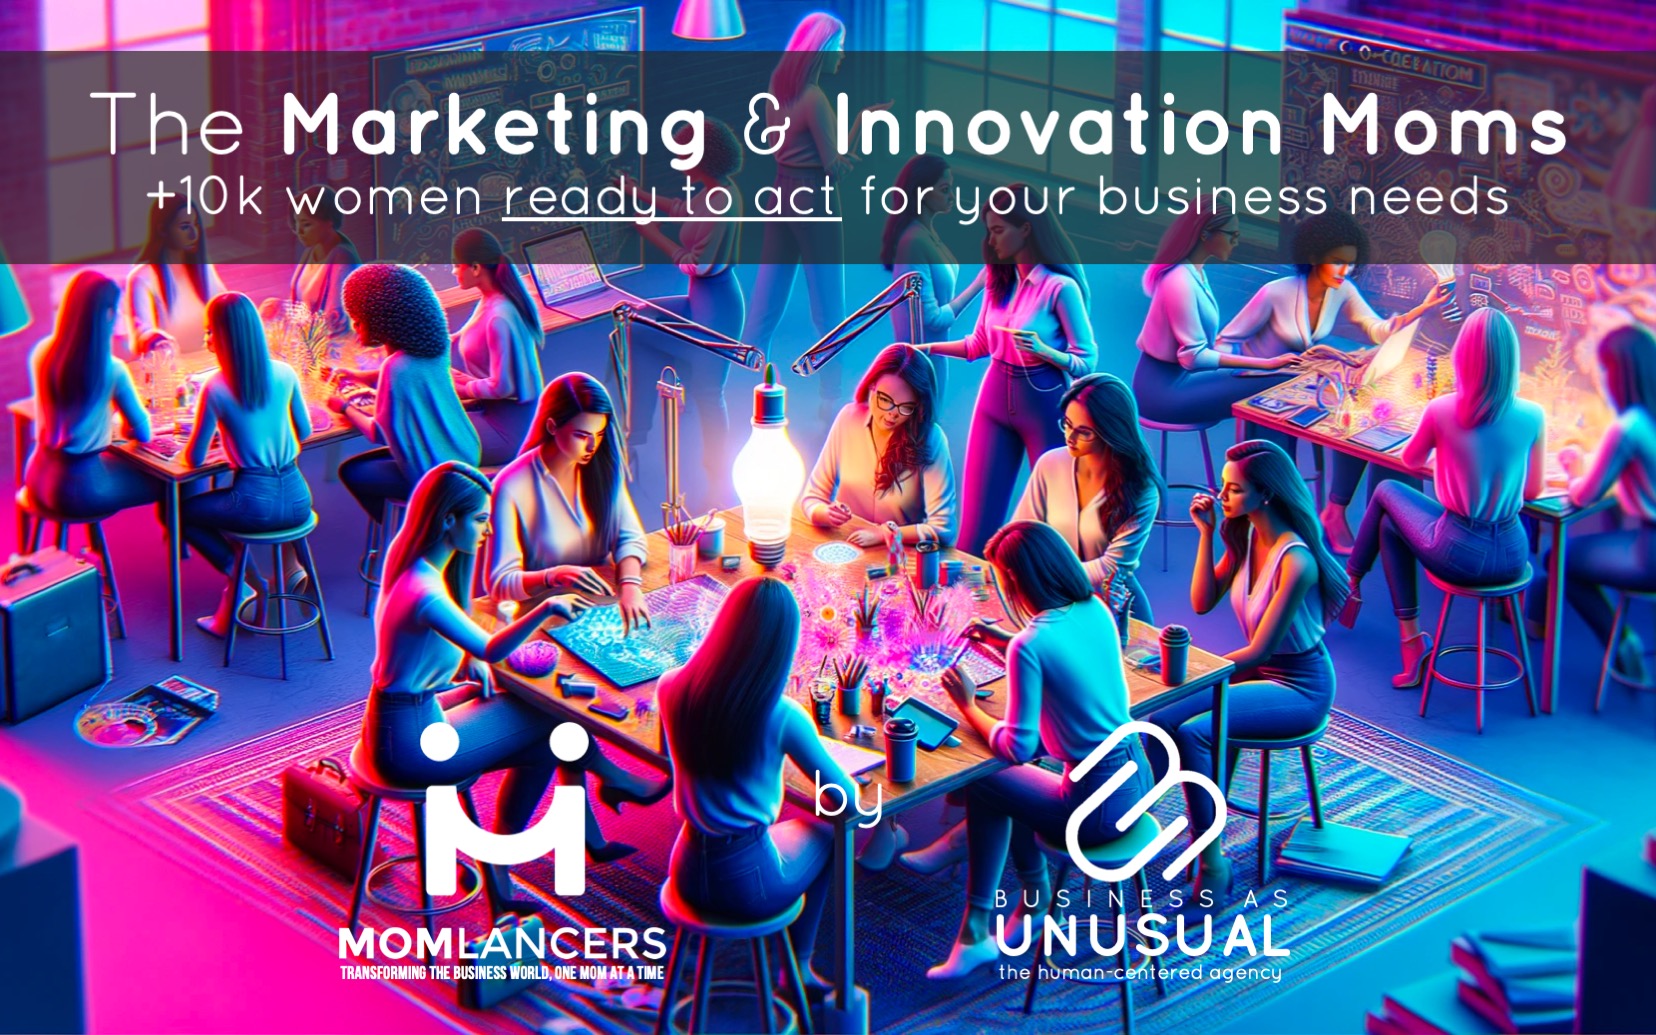 The Marketing & Innovation Moms by Momlancers and Business as Unusual